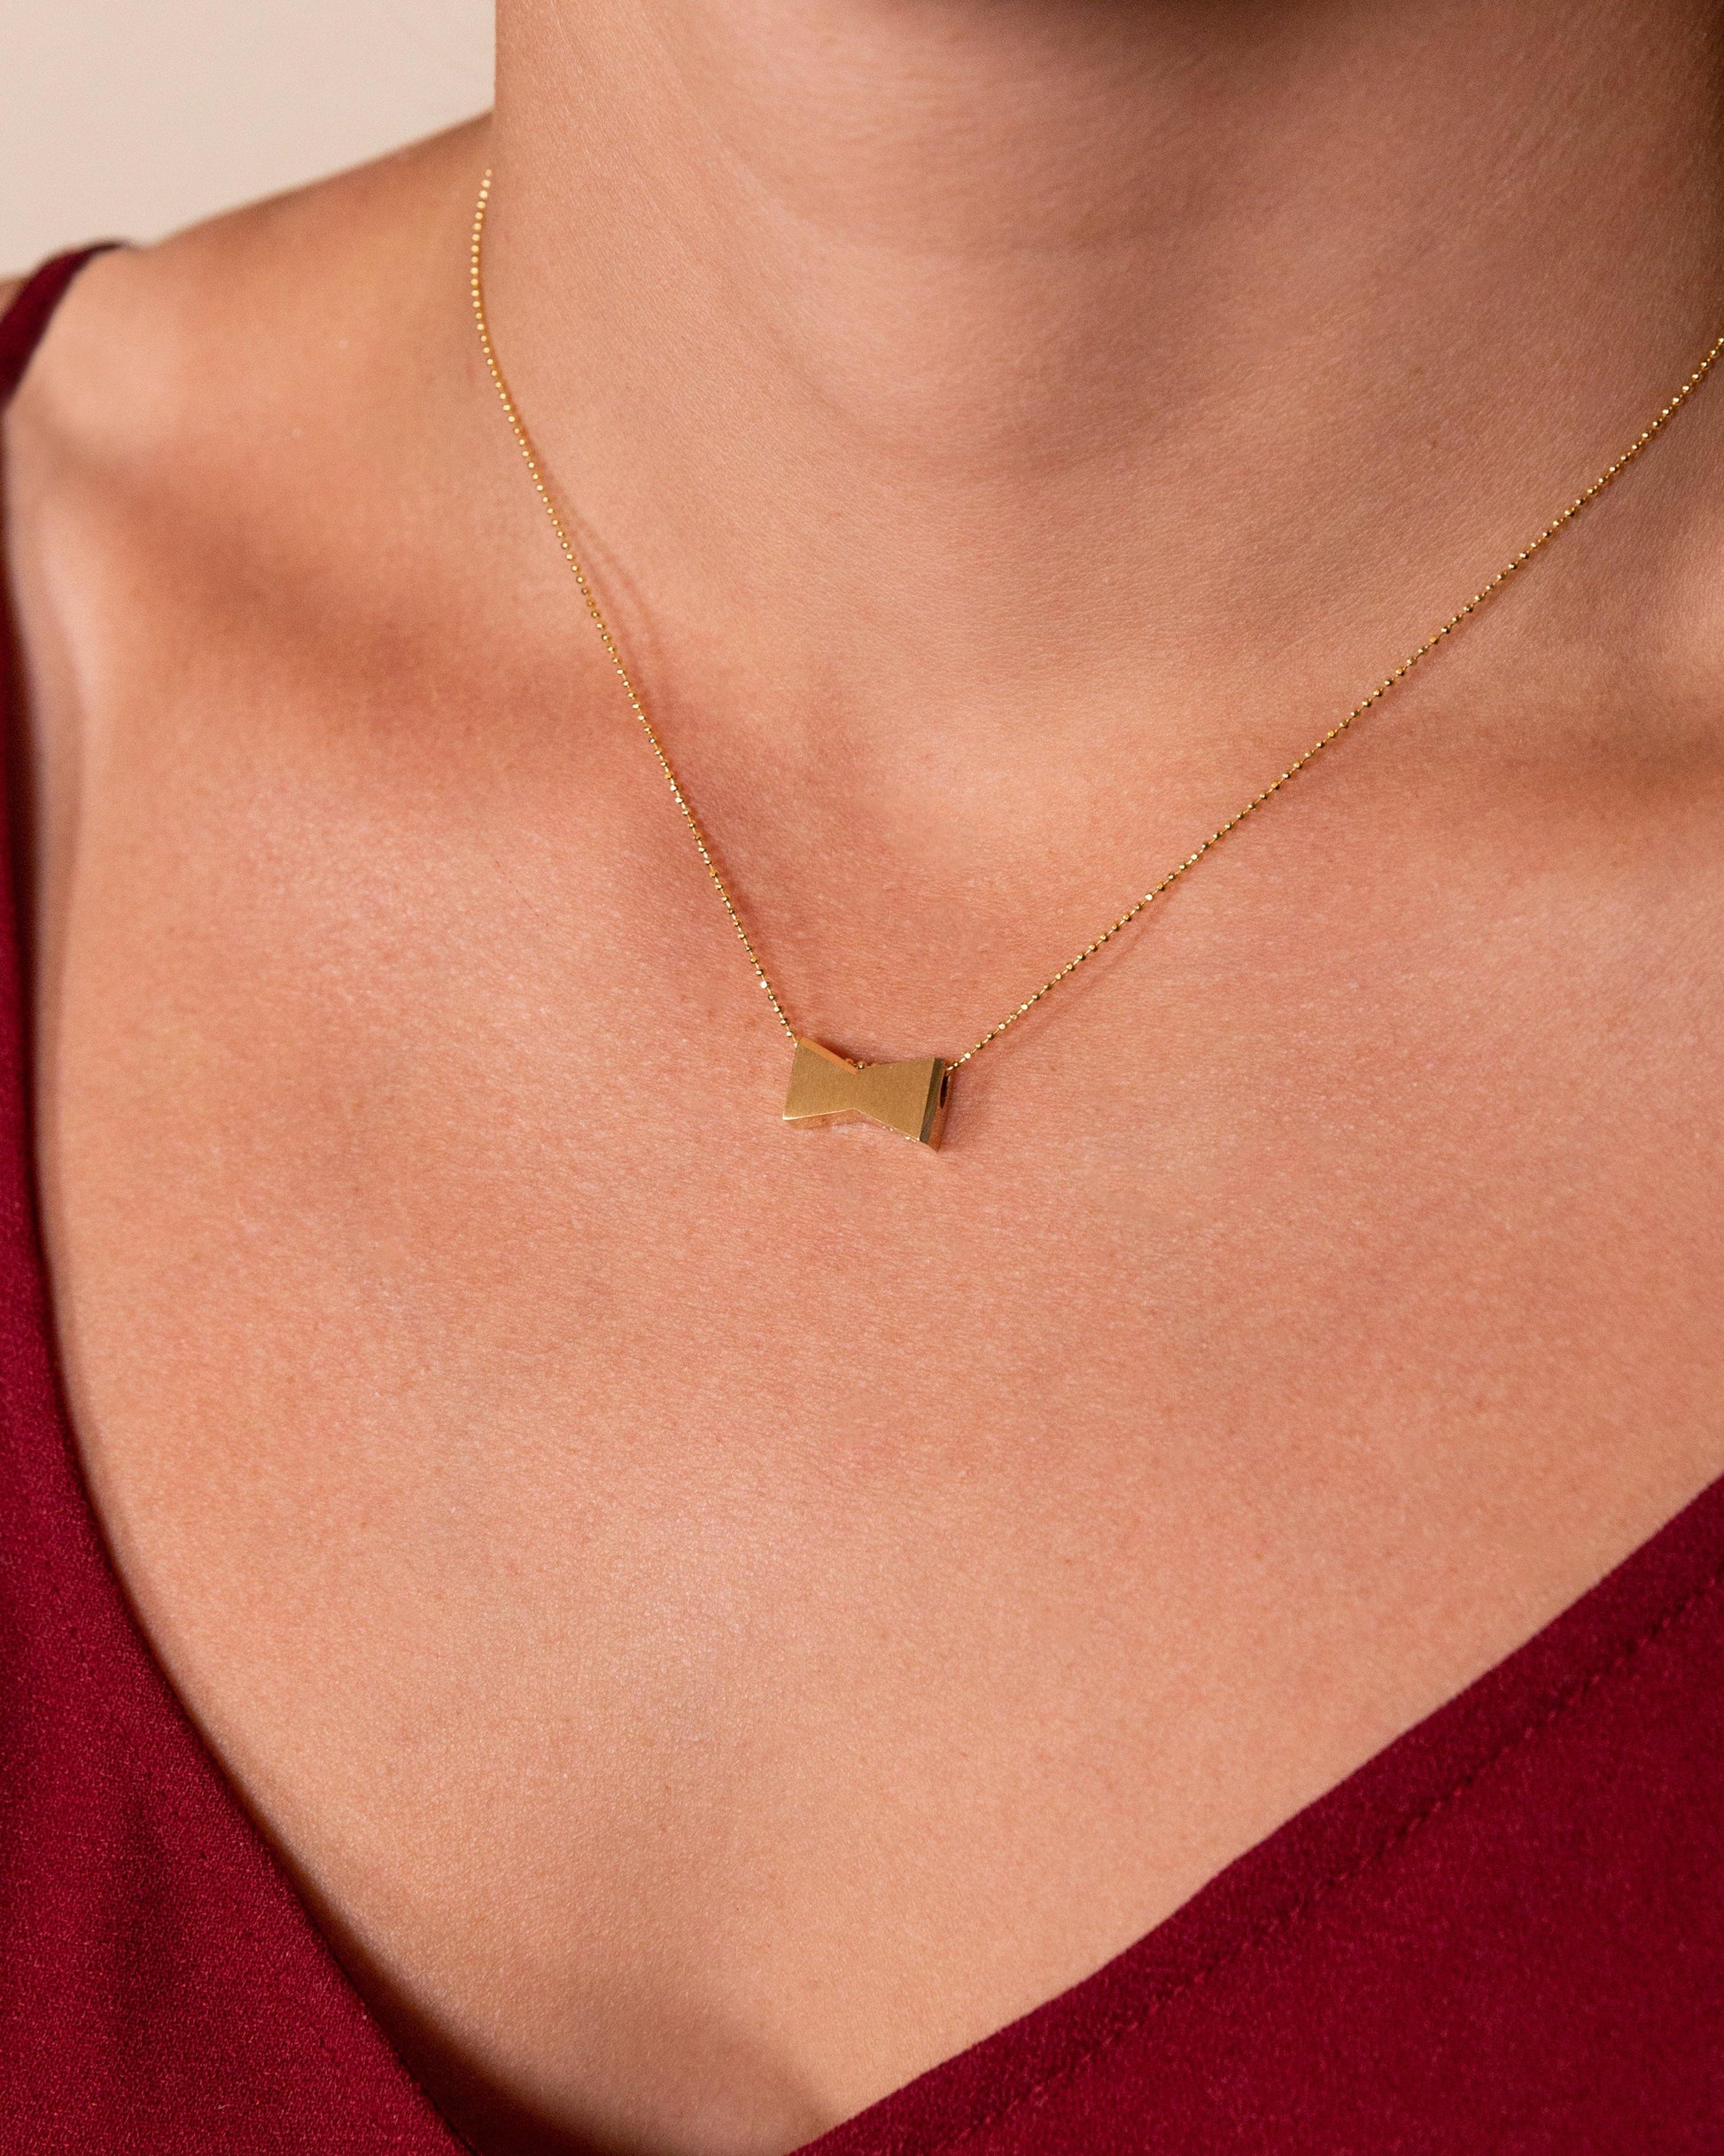 woman wearing necklace 14 carat gold Budweiser bowtie necklace